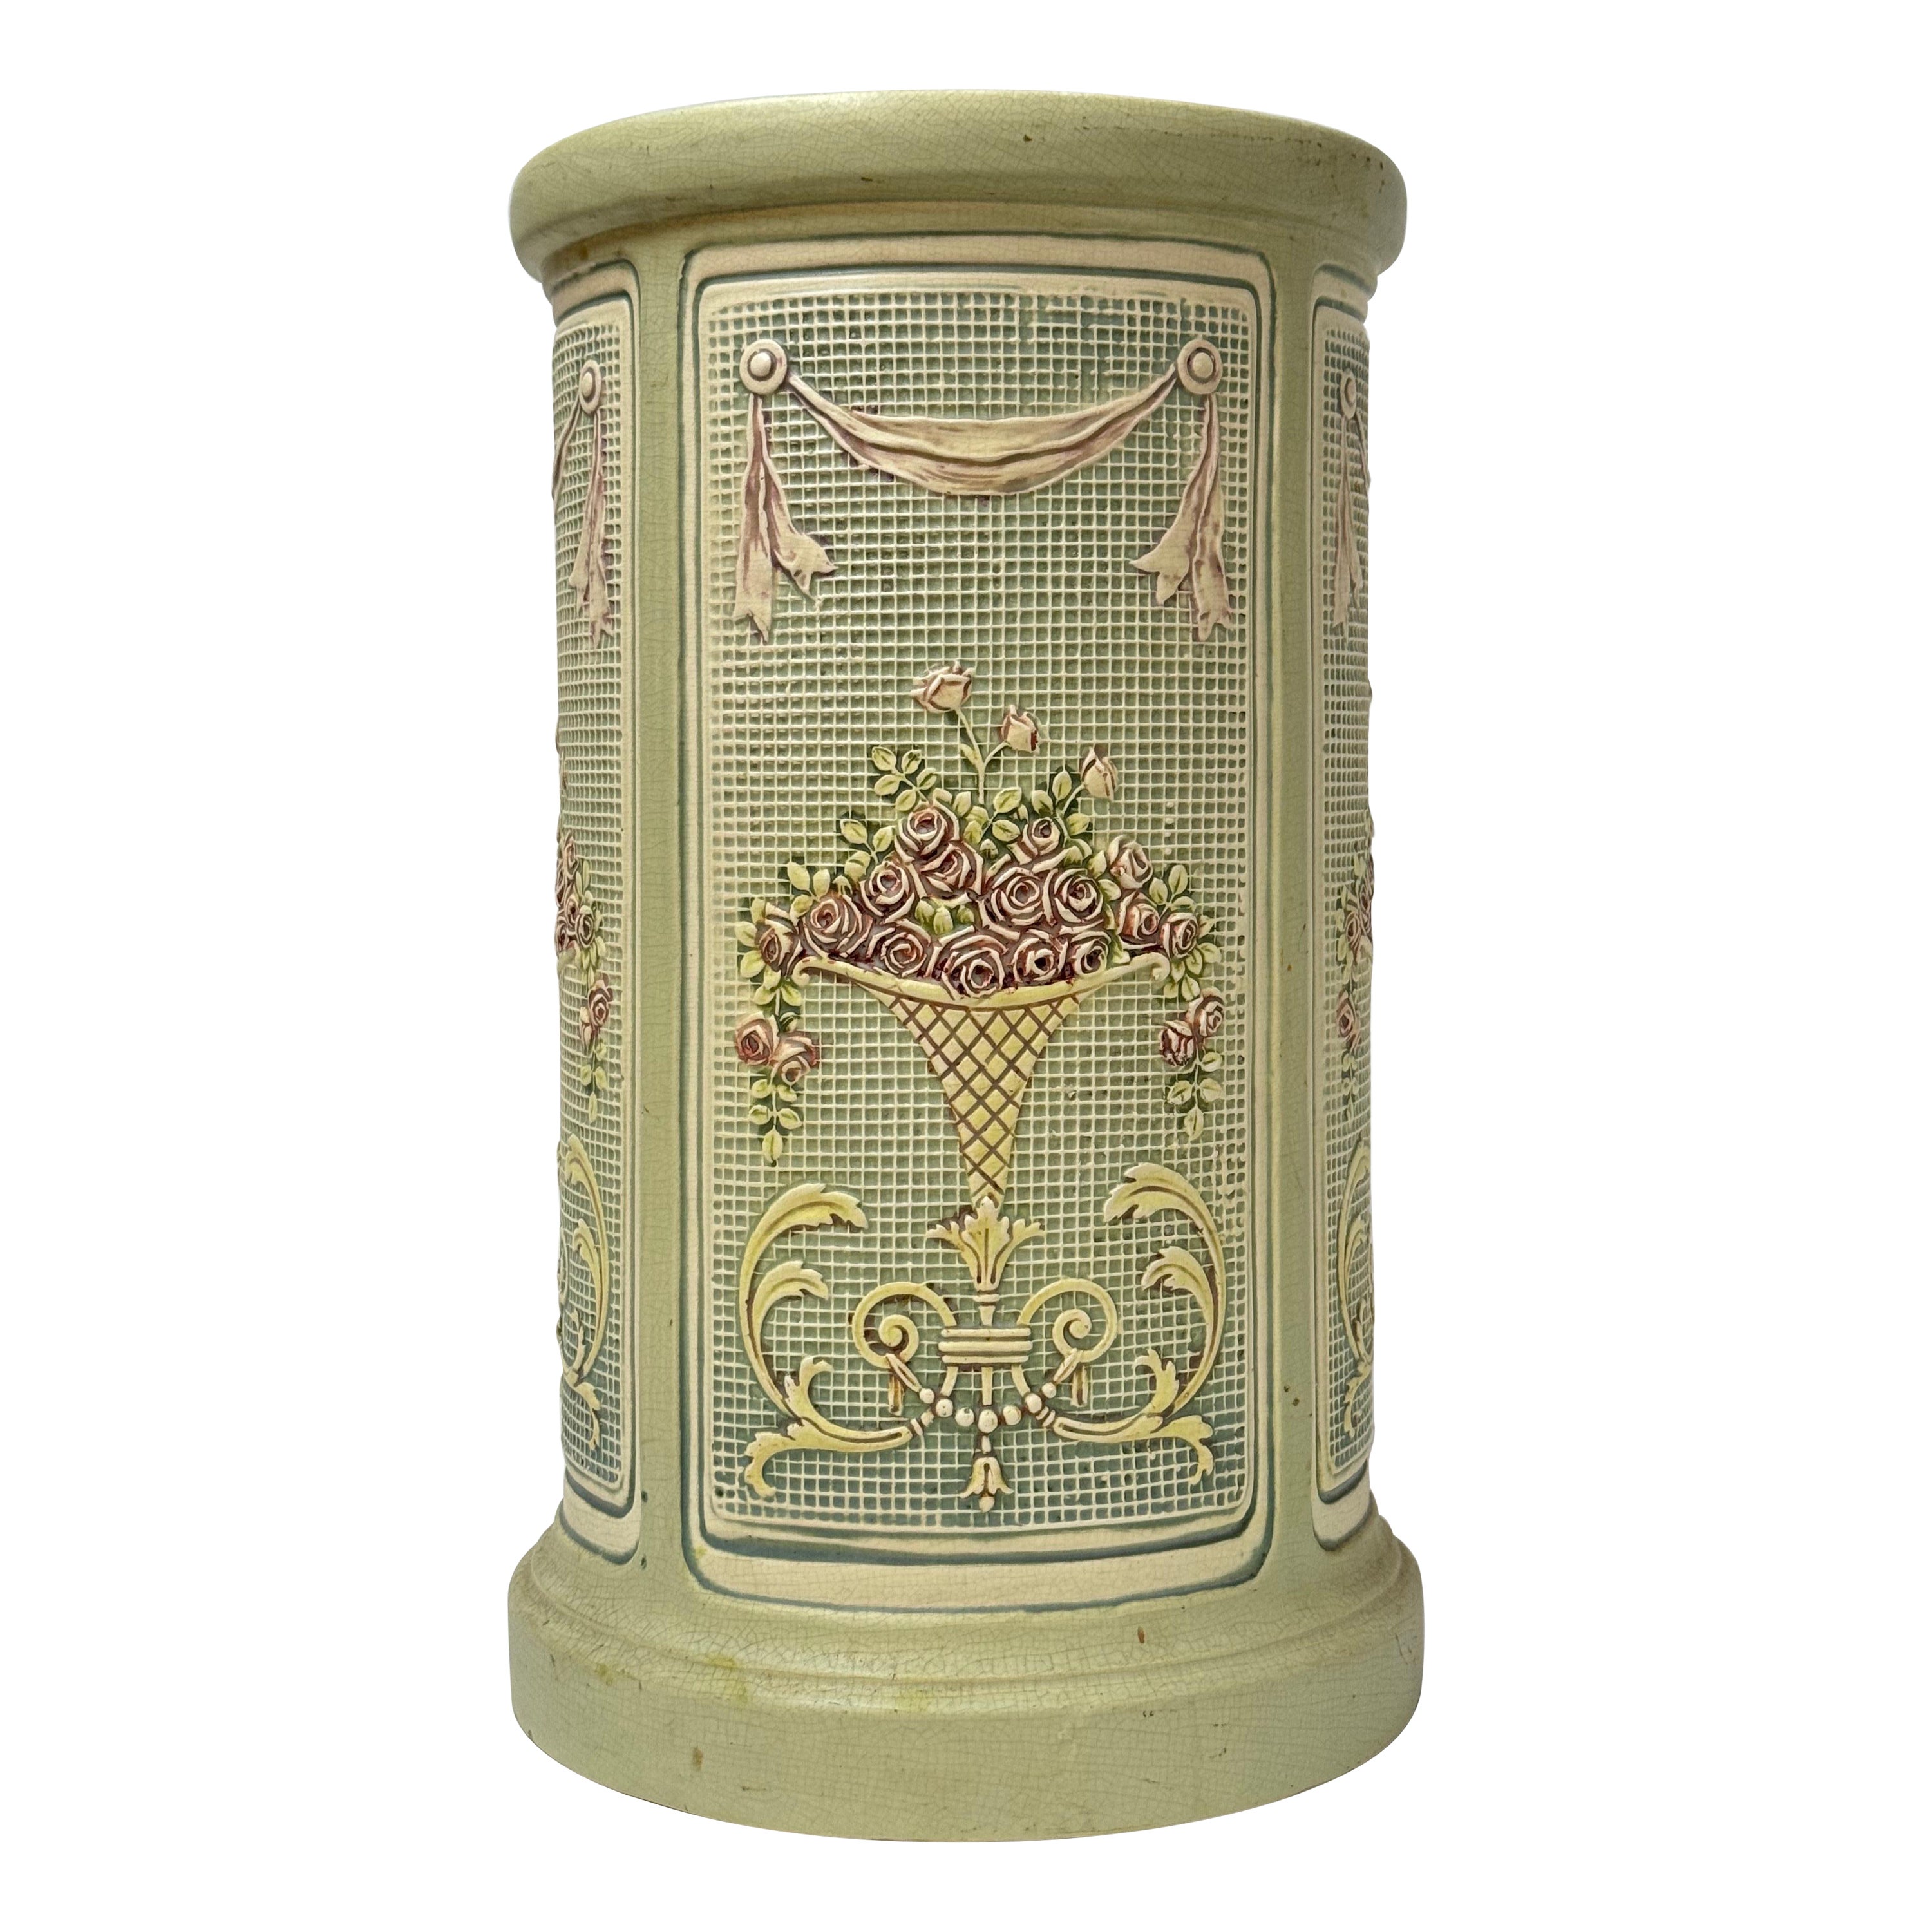 Rare and Collectible Weller Dupont Jardiniere For Sale